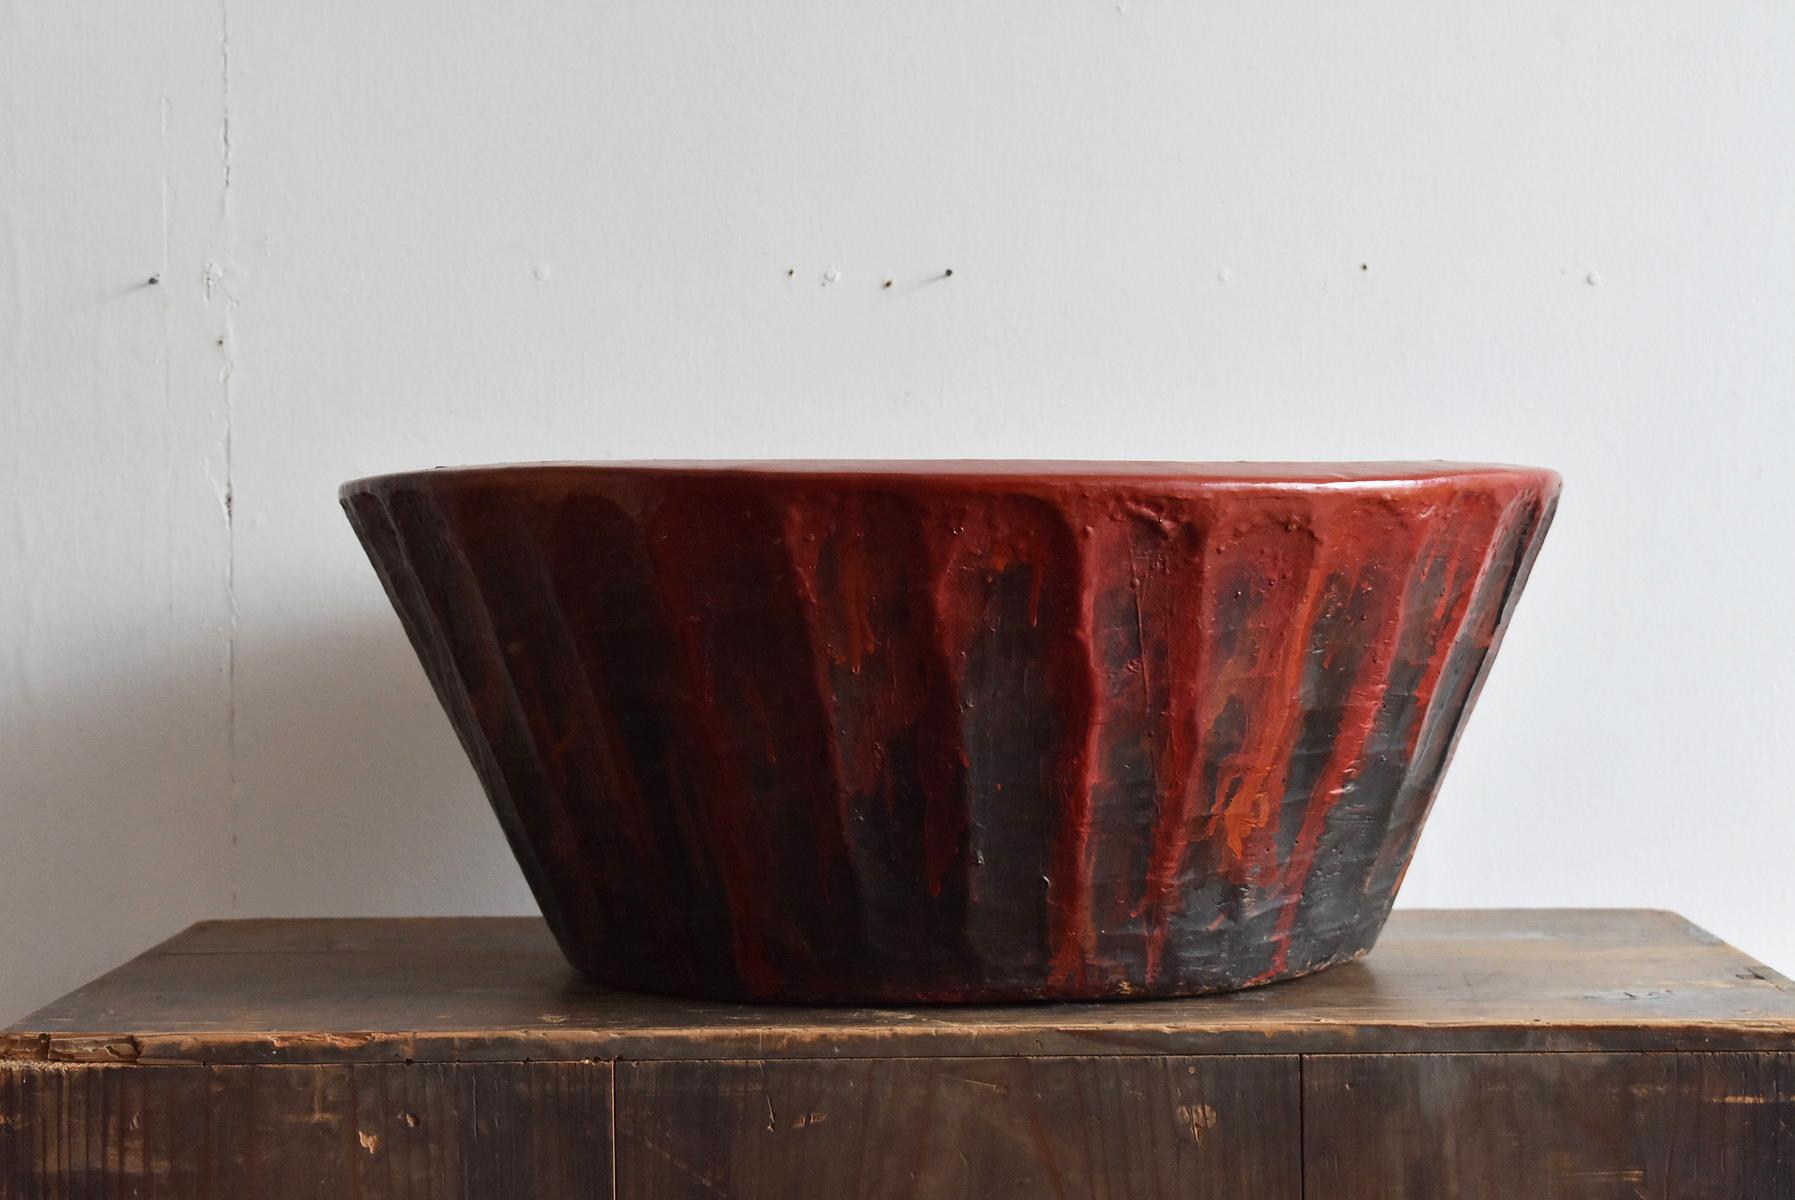 A wooden bowl used from the Meiji era to the early Showa period (1868-1940).
It is made by hollowing out a thick tree.
It's very cool, isn't it?
The type of tree could not be determined.
But it's heavy.
Weight: 8.6kg

This was the one I used